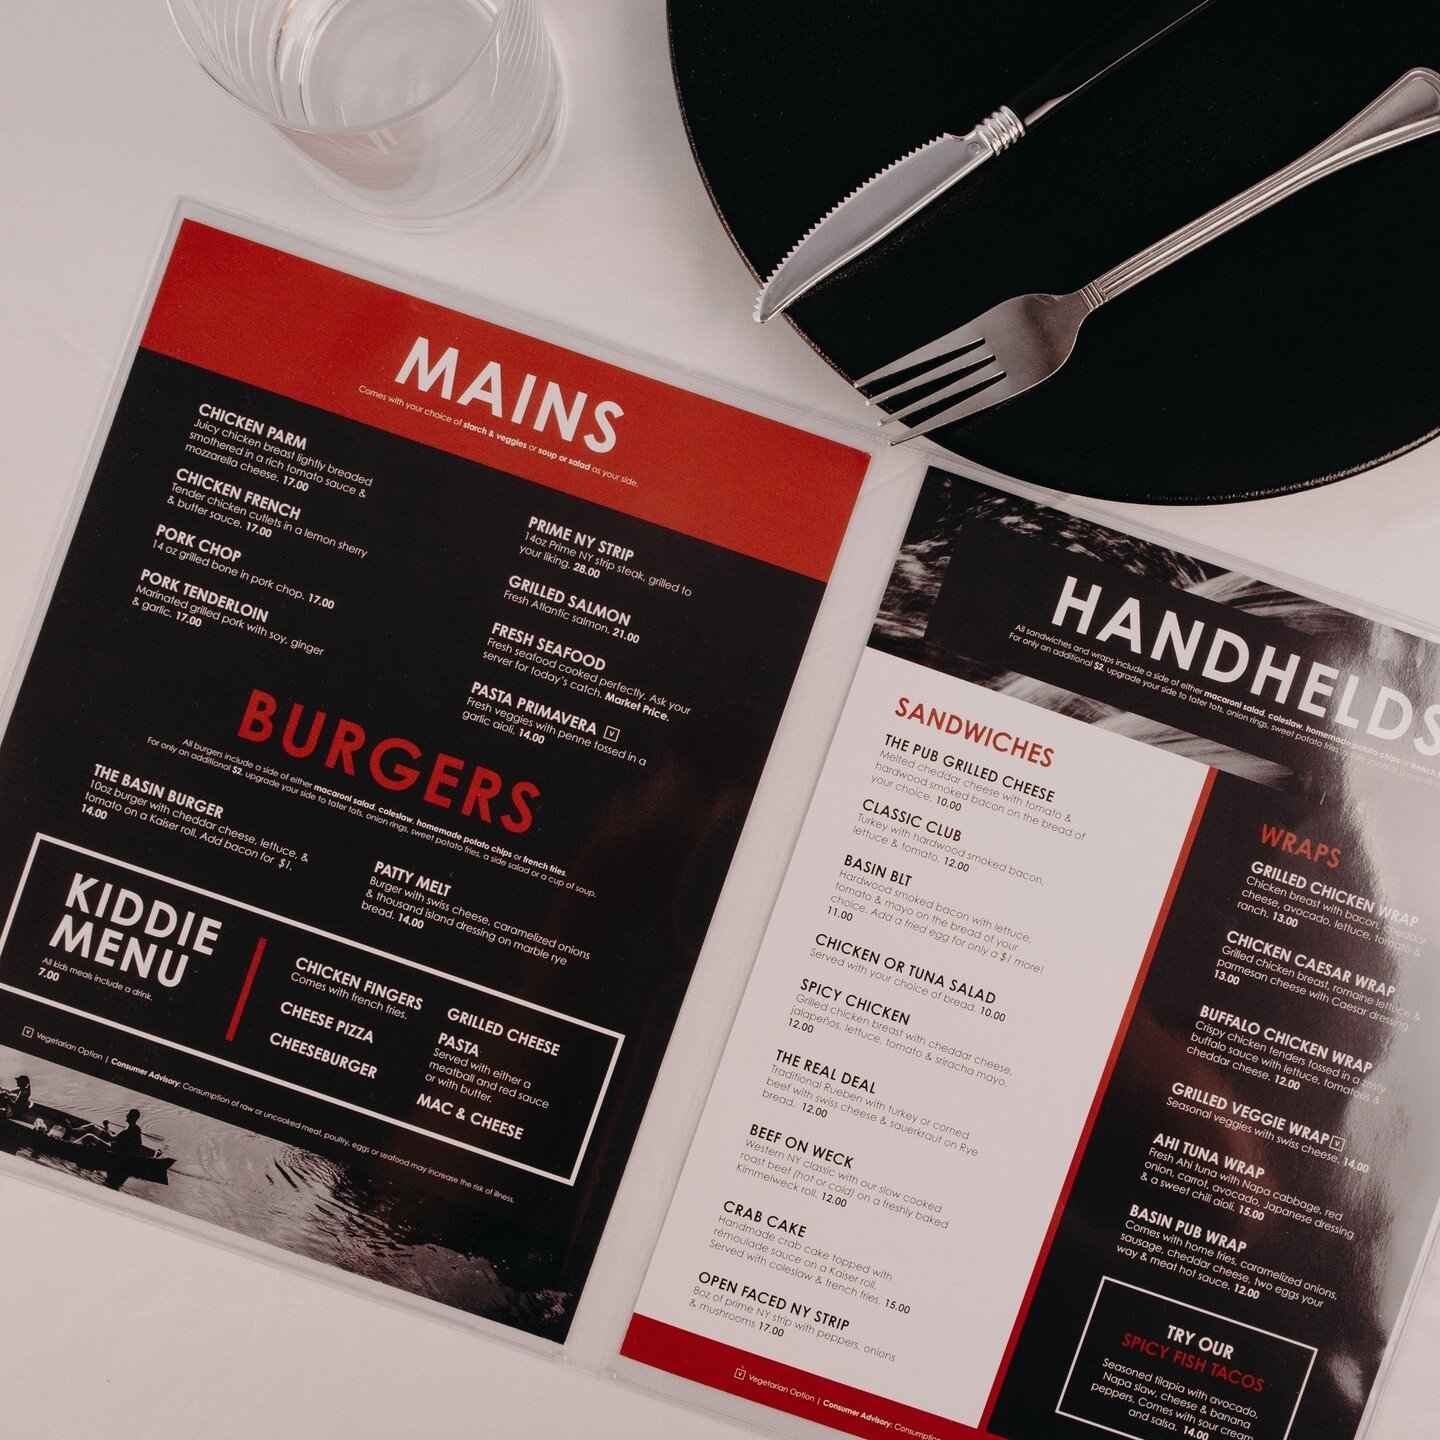 Our all-clear vinyl menu covers are made to protect and preserve the life of your menus. They offer a great alternative to laminated menus and are easy to sanitize with soap and water.⁠
-⁠
⁠
⁠
#coffee #wine #plantbased #glutenfree #cocktails #craftbe